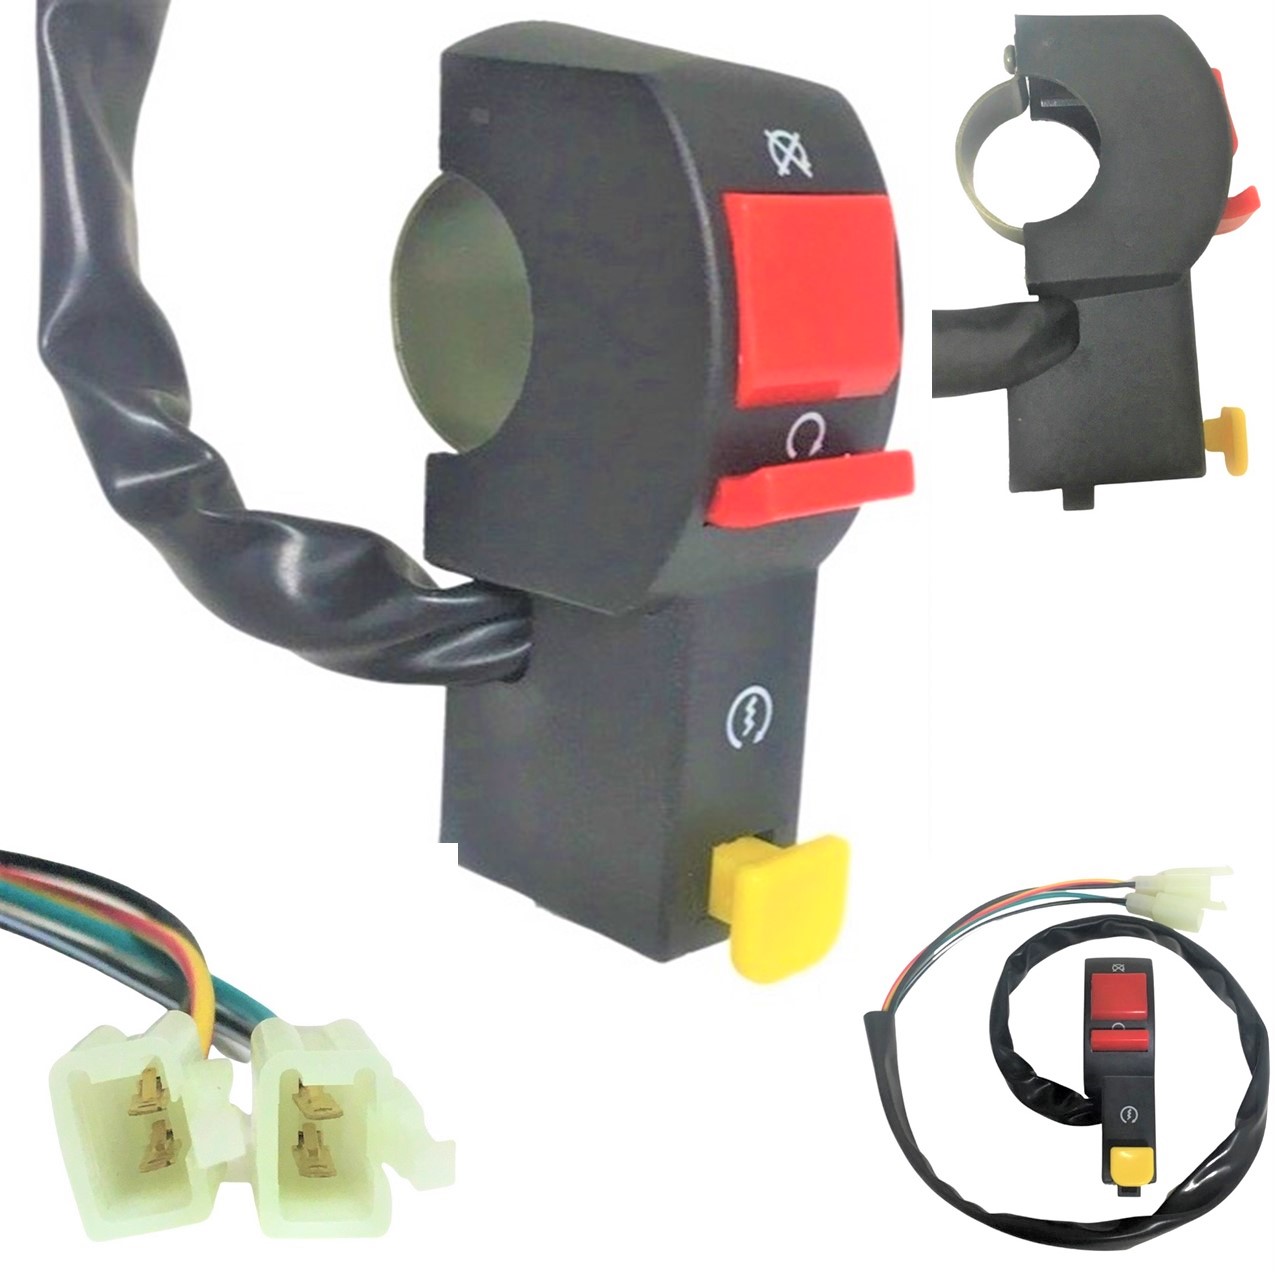 Kill Switch with Electric Start Button 2 Wire Female Jack + 2 Wire Female Jack. Fits Many Dirt Bikes and ATV's - Click Image to Close